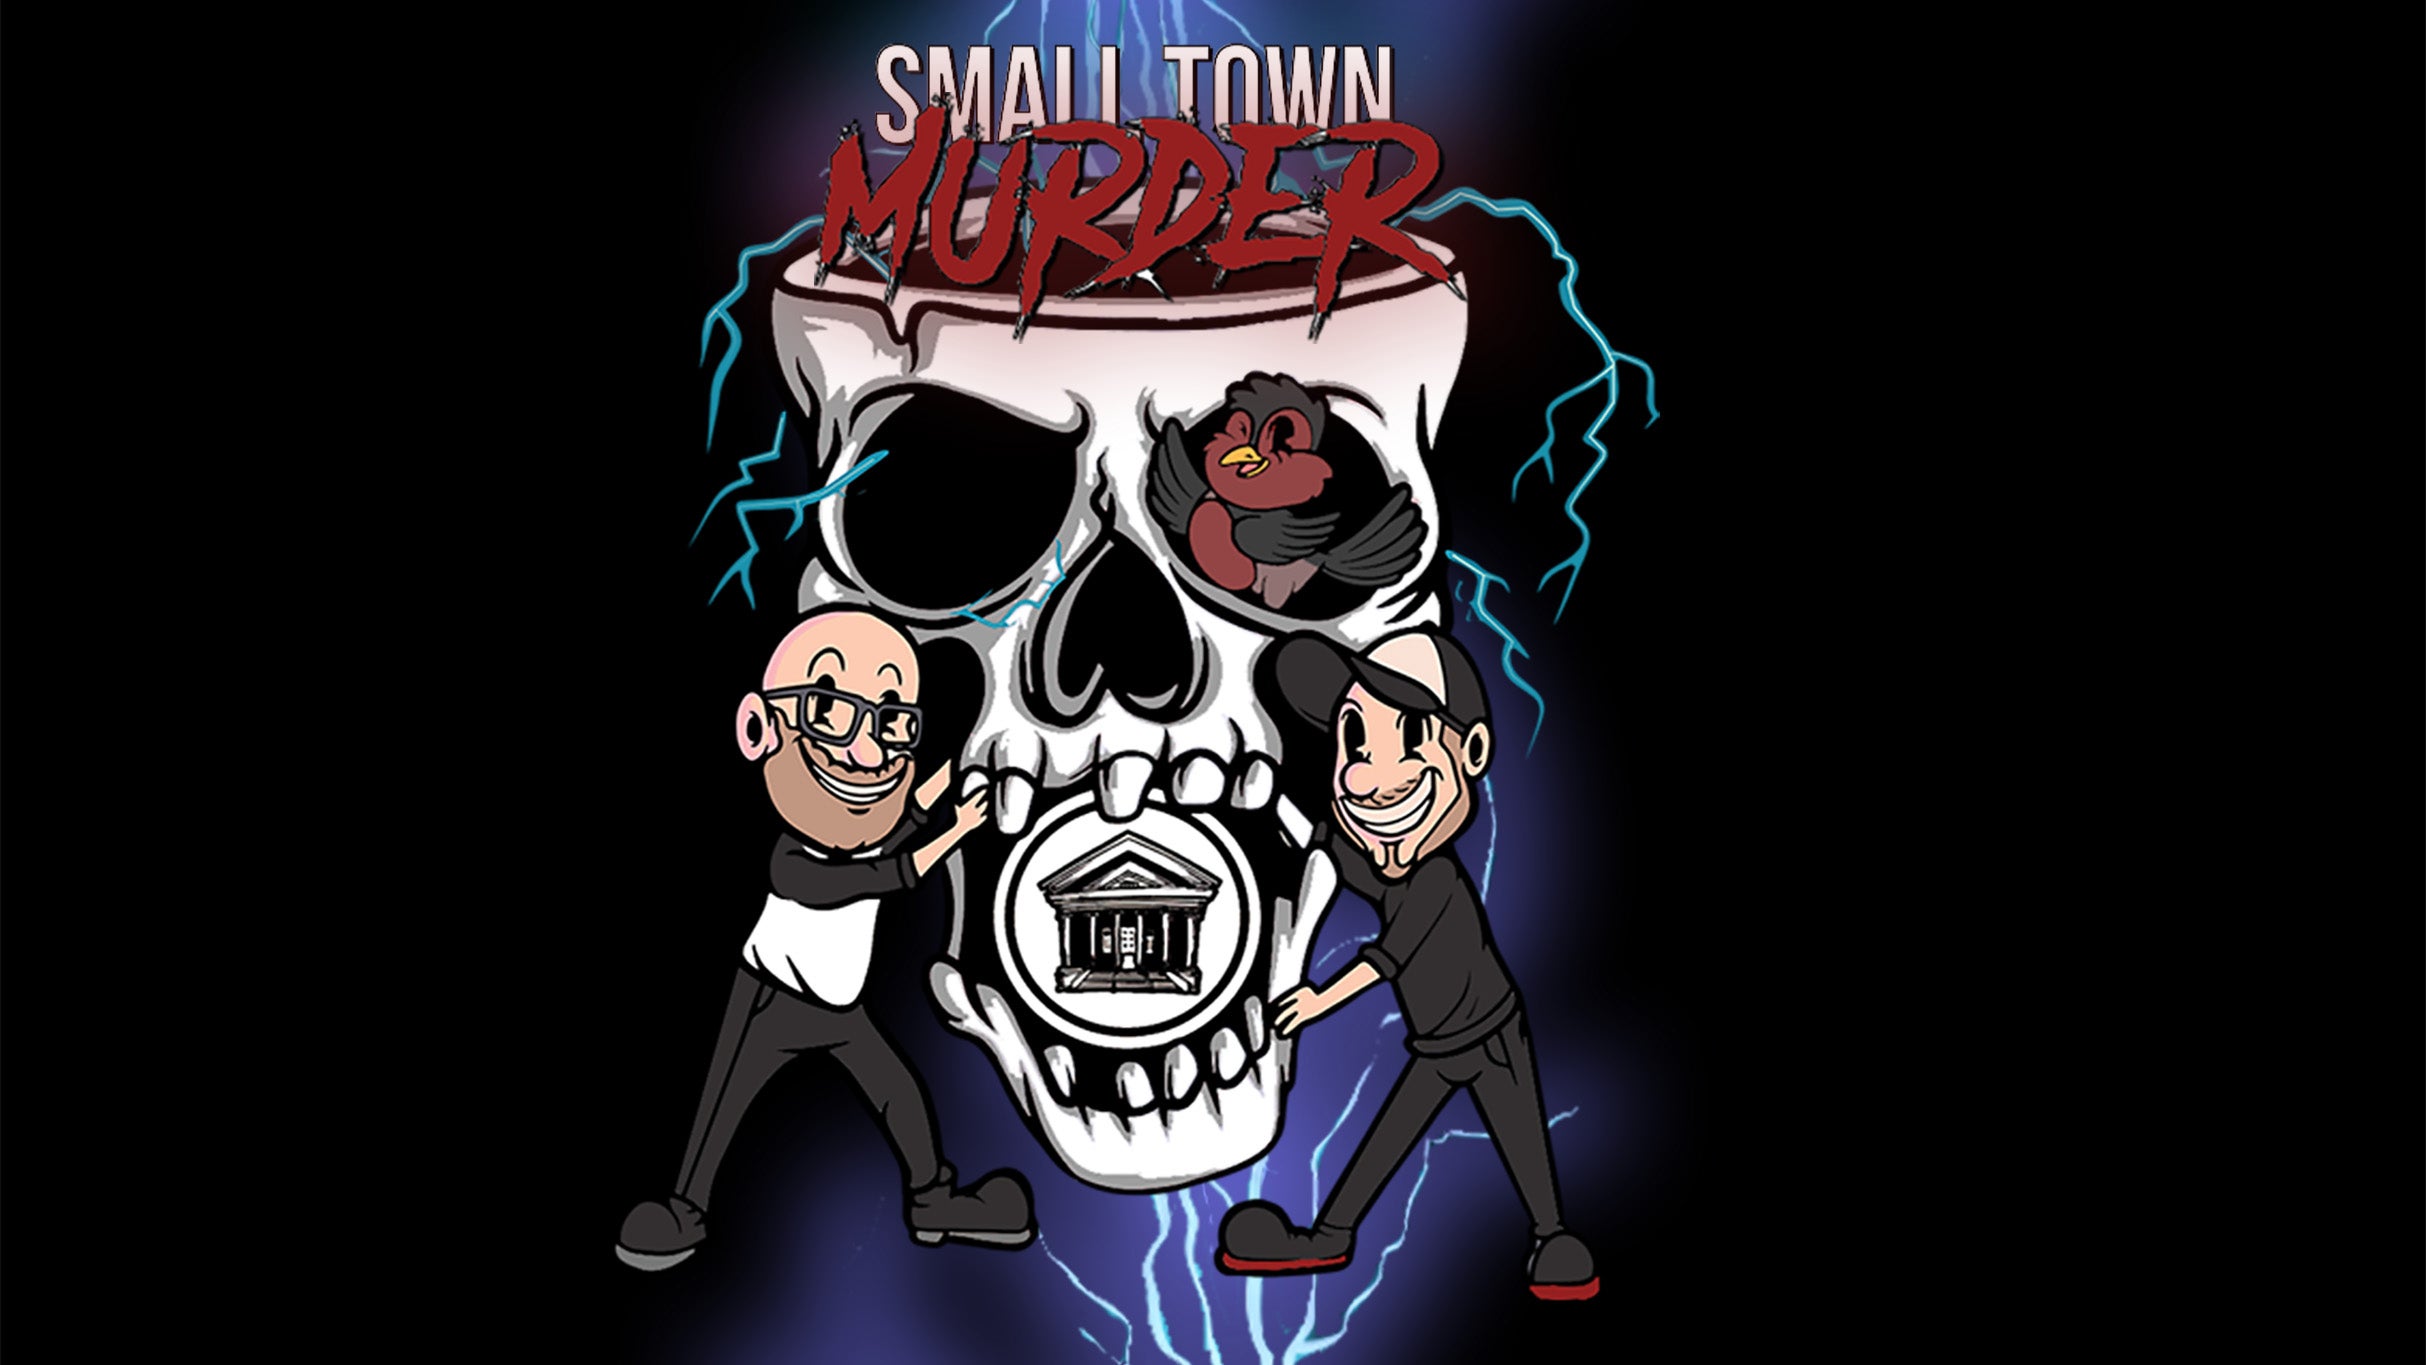 Small Town Murder free presale password for early tickets in Philadelphia